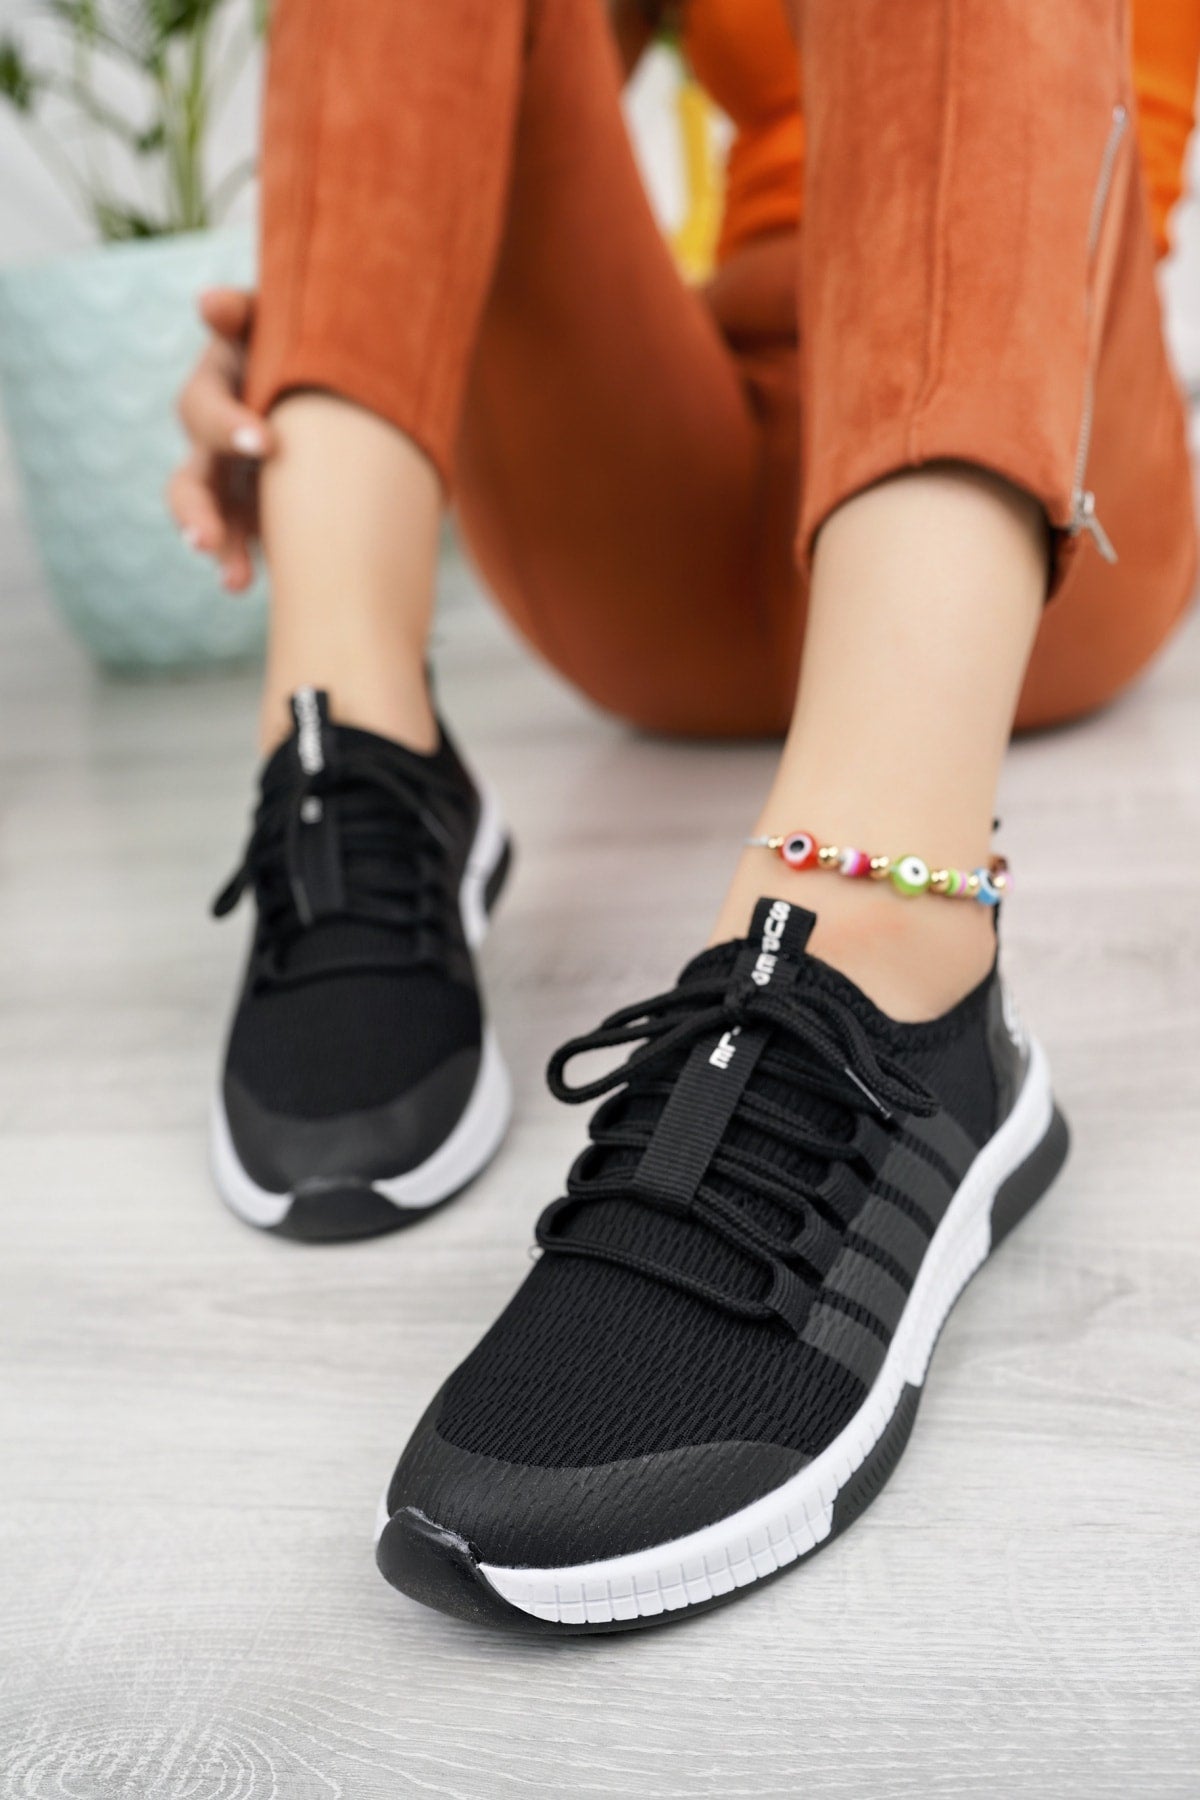 Black - Knitwear Sports Shoes for Daily Use